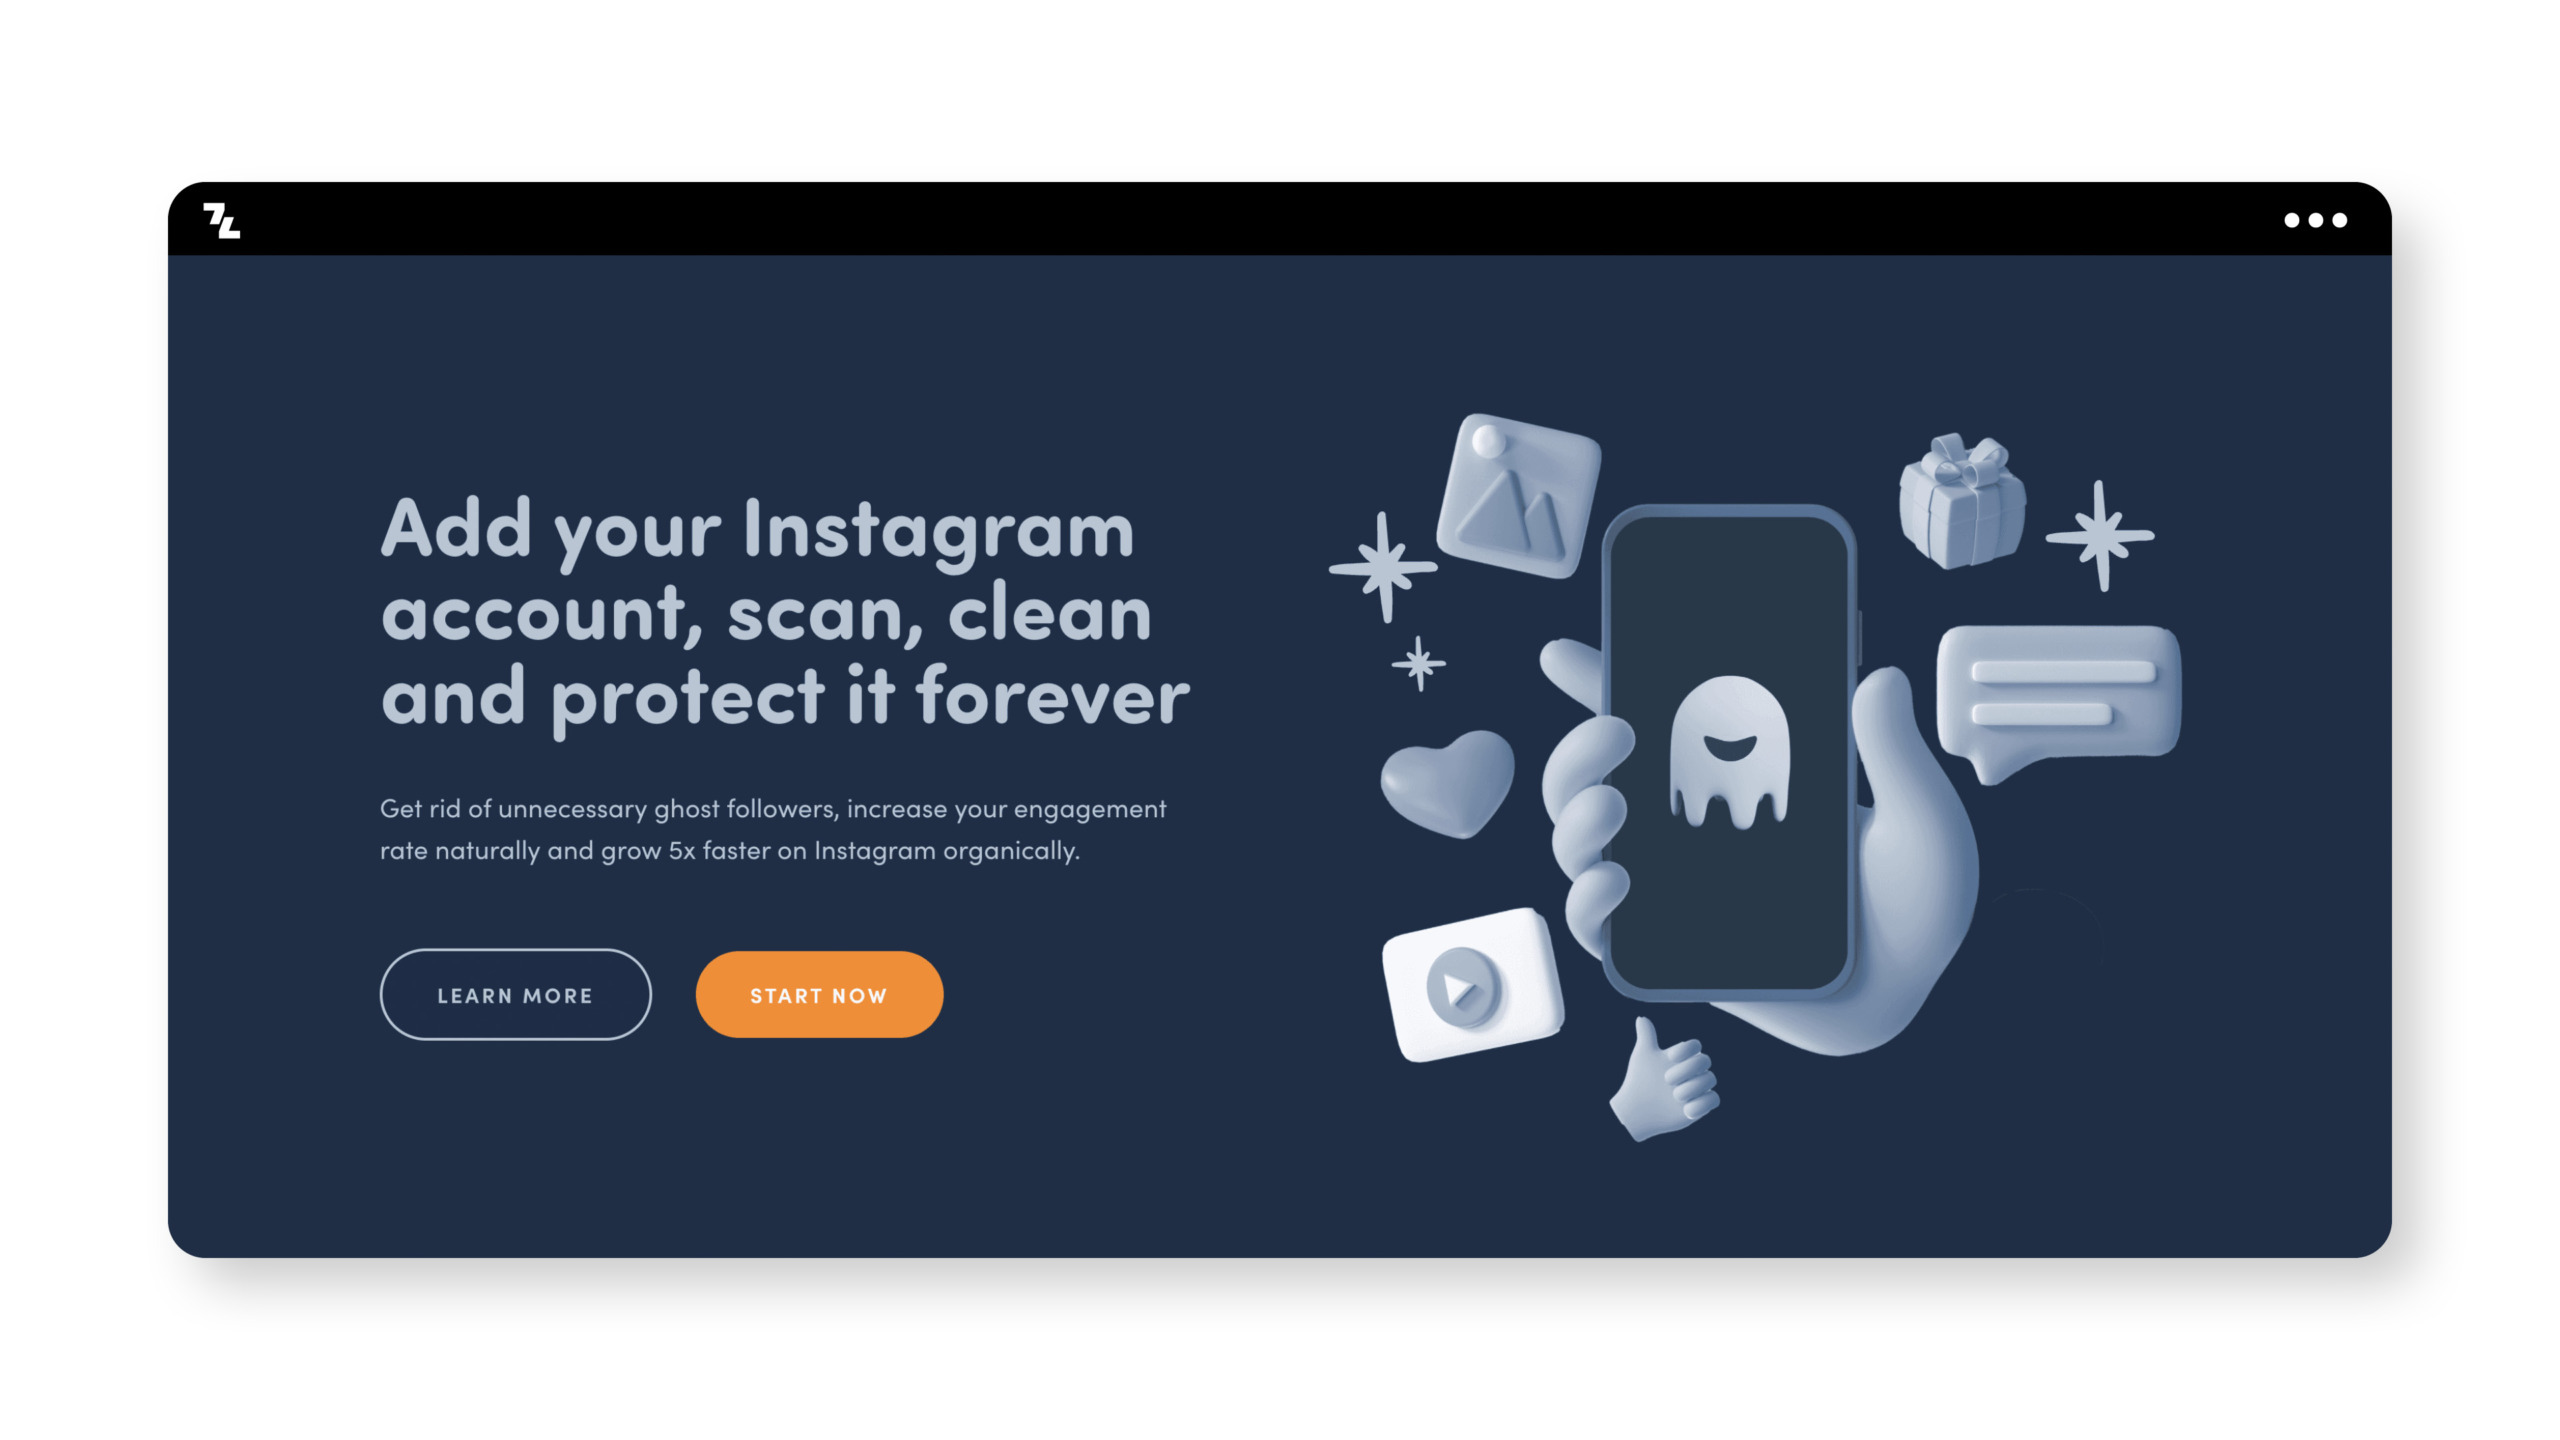 Add your Instagram account and protect it forever with the top 7 Instagram bots.